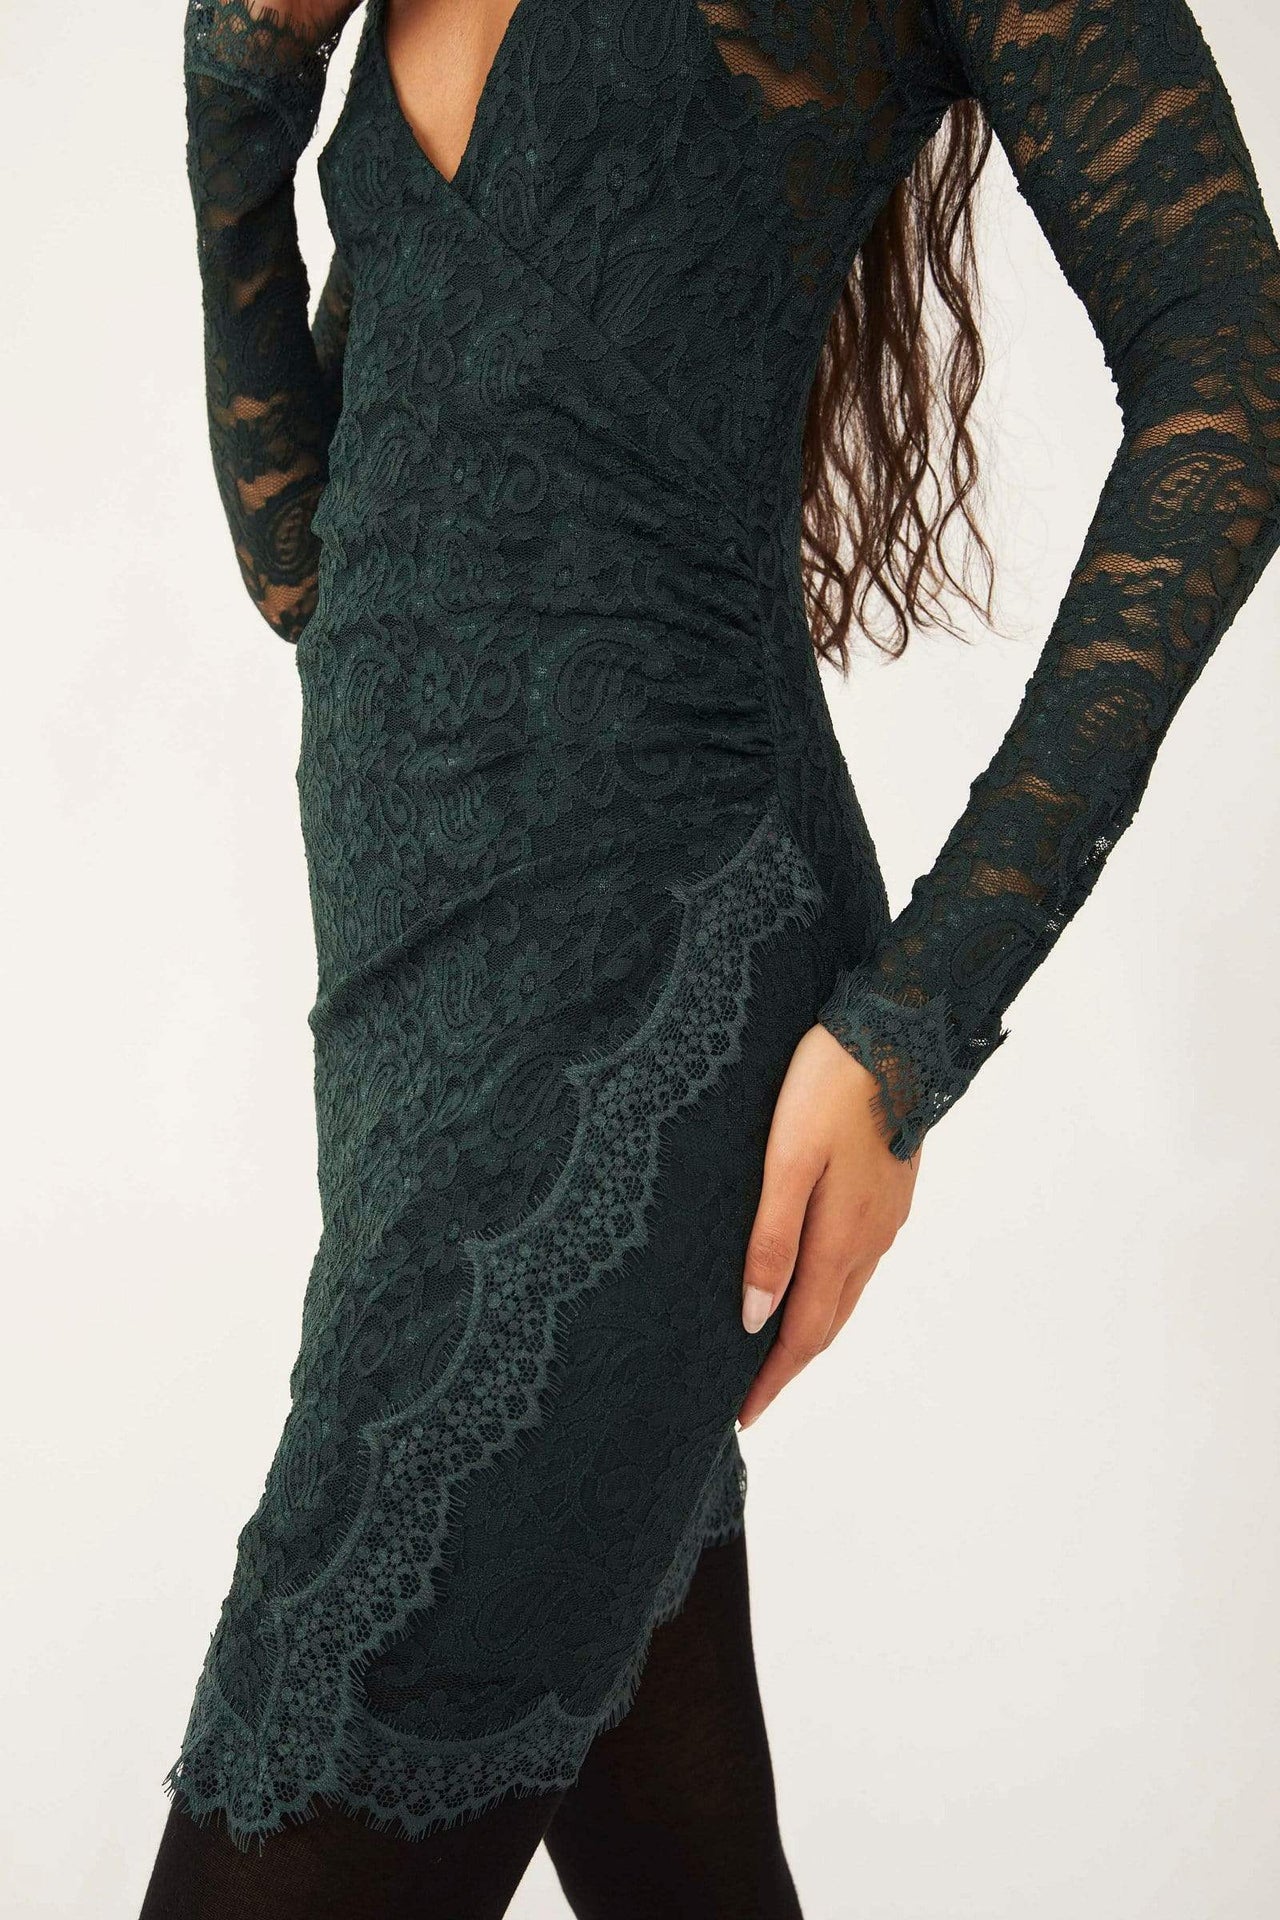 Pearl Lace Mini Dress Deepest Spruce, Mini Dress by Free People | LIT Boutique